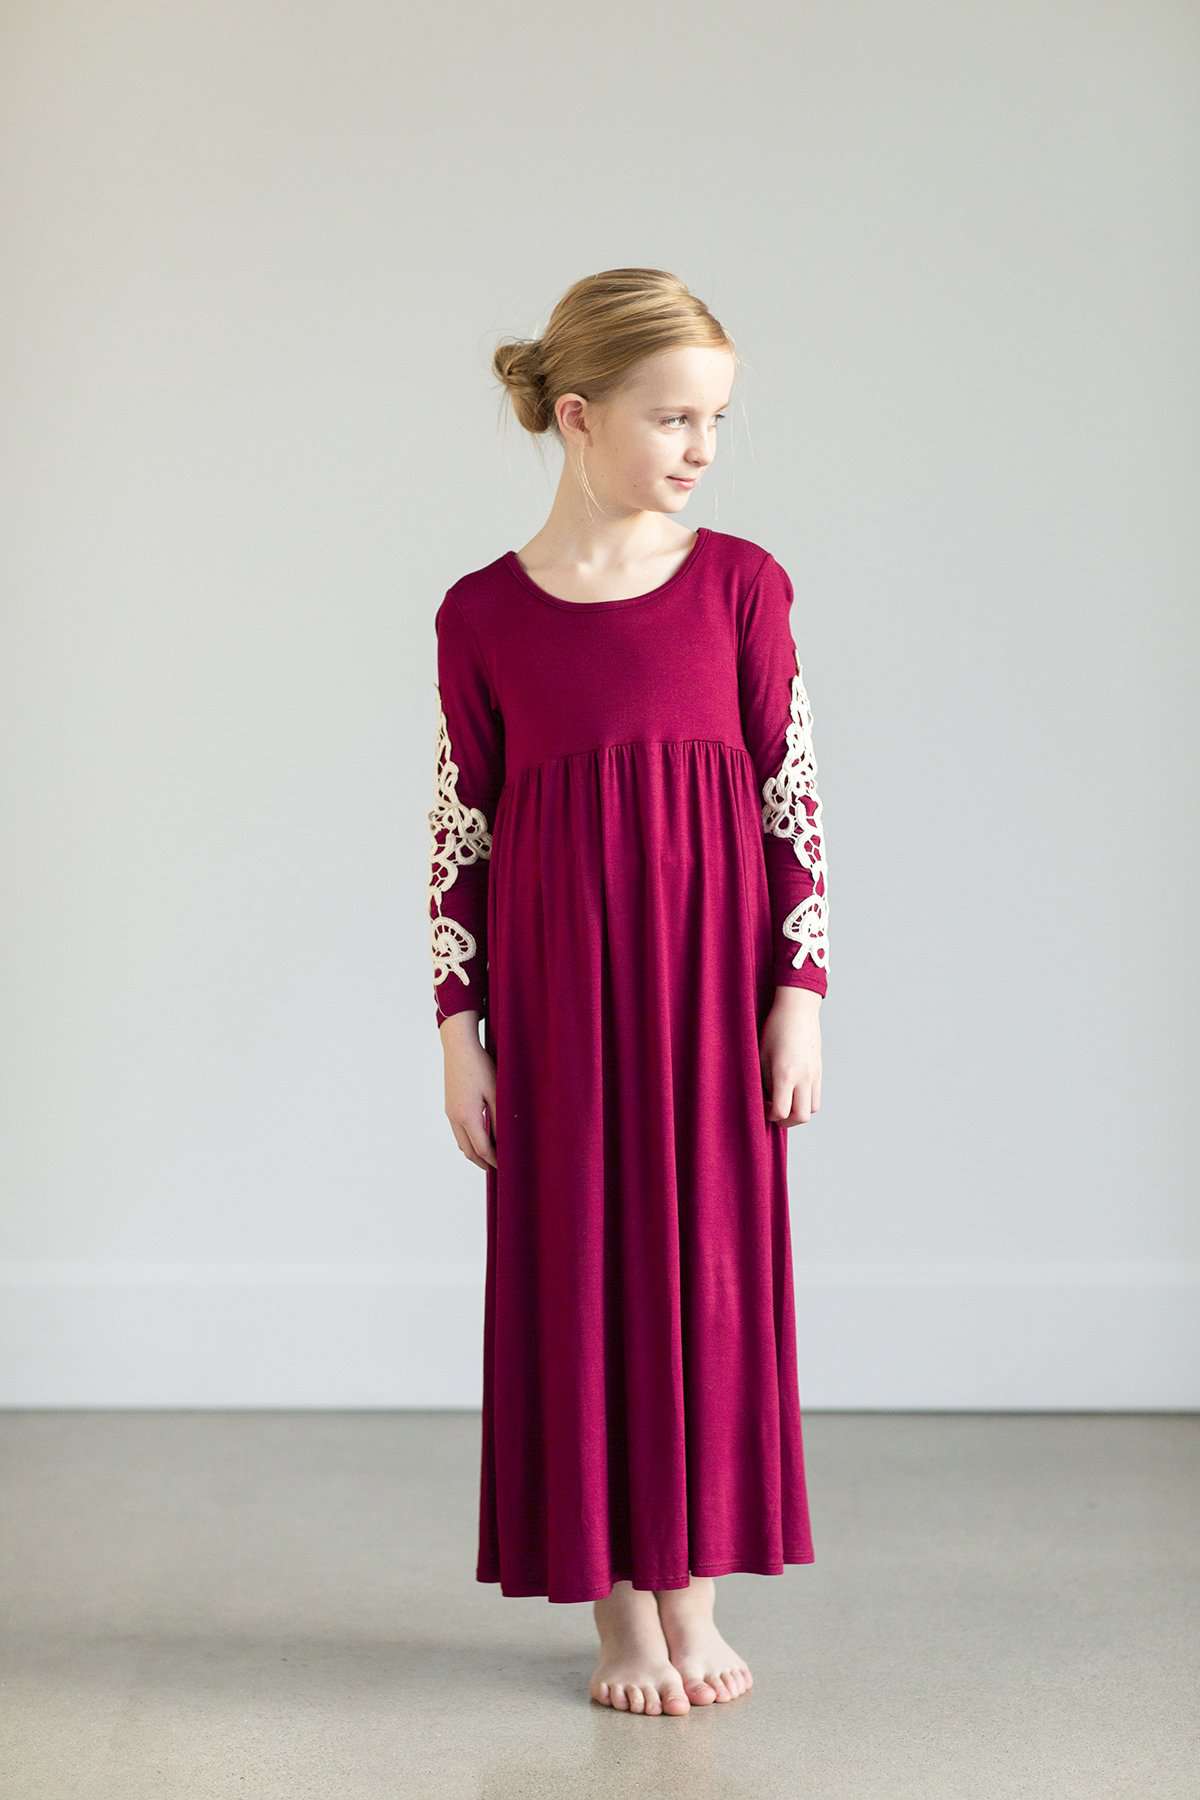 Young girl wearing a burgandy maxi dress with crochet detail.